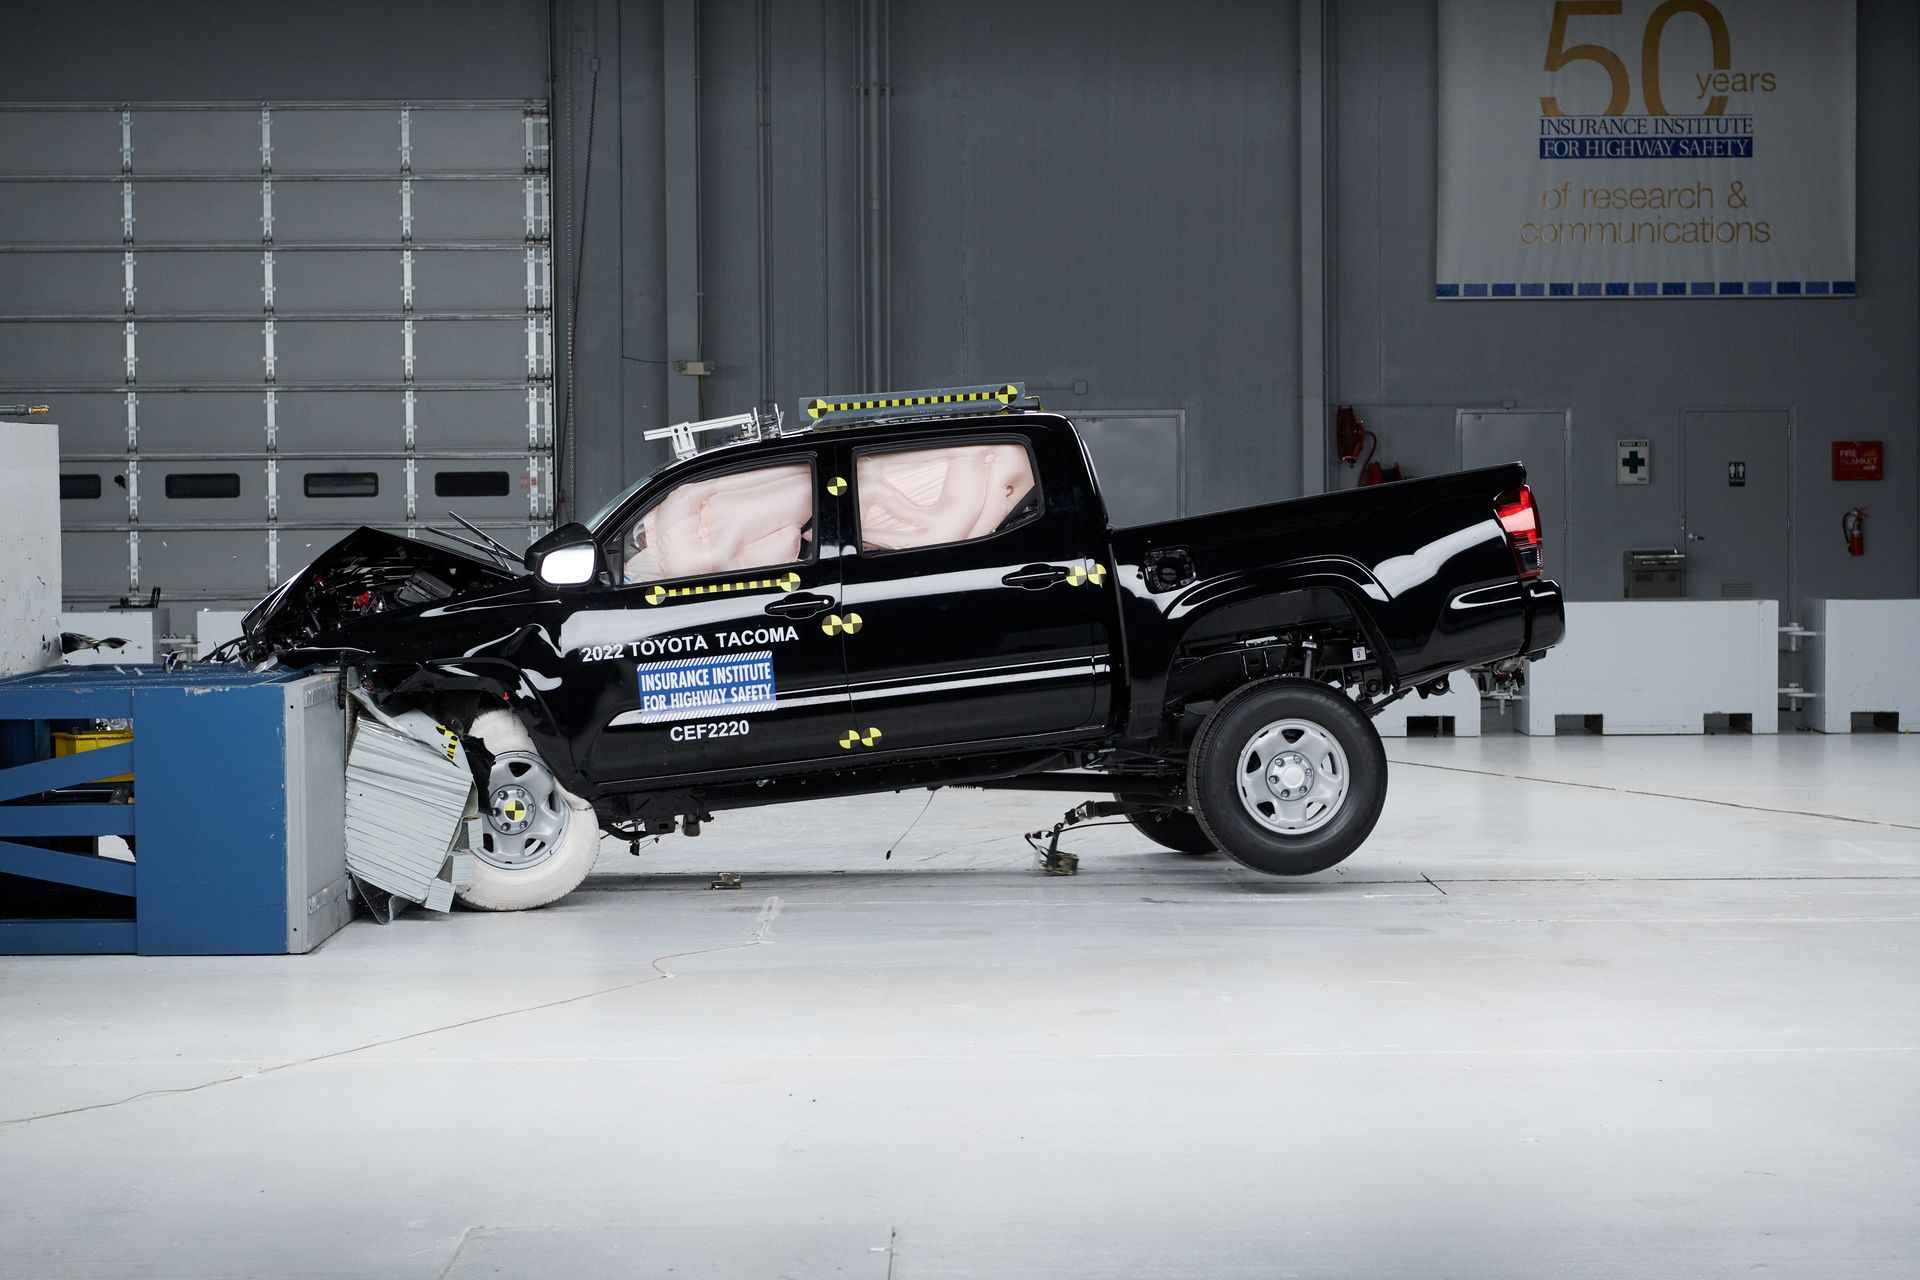 Rear-seat passengers don't fare so well in IIHS midsize pickup tests